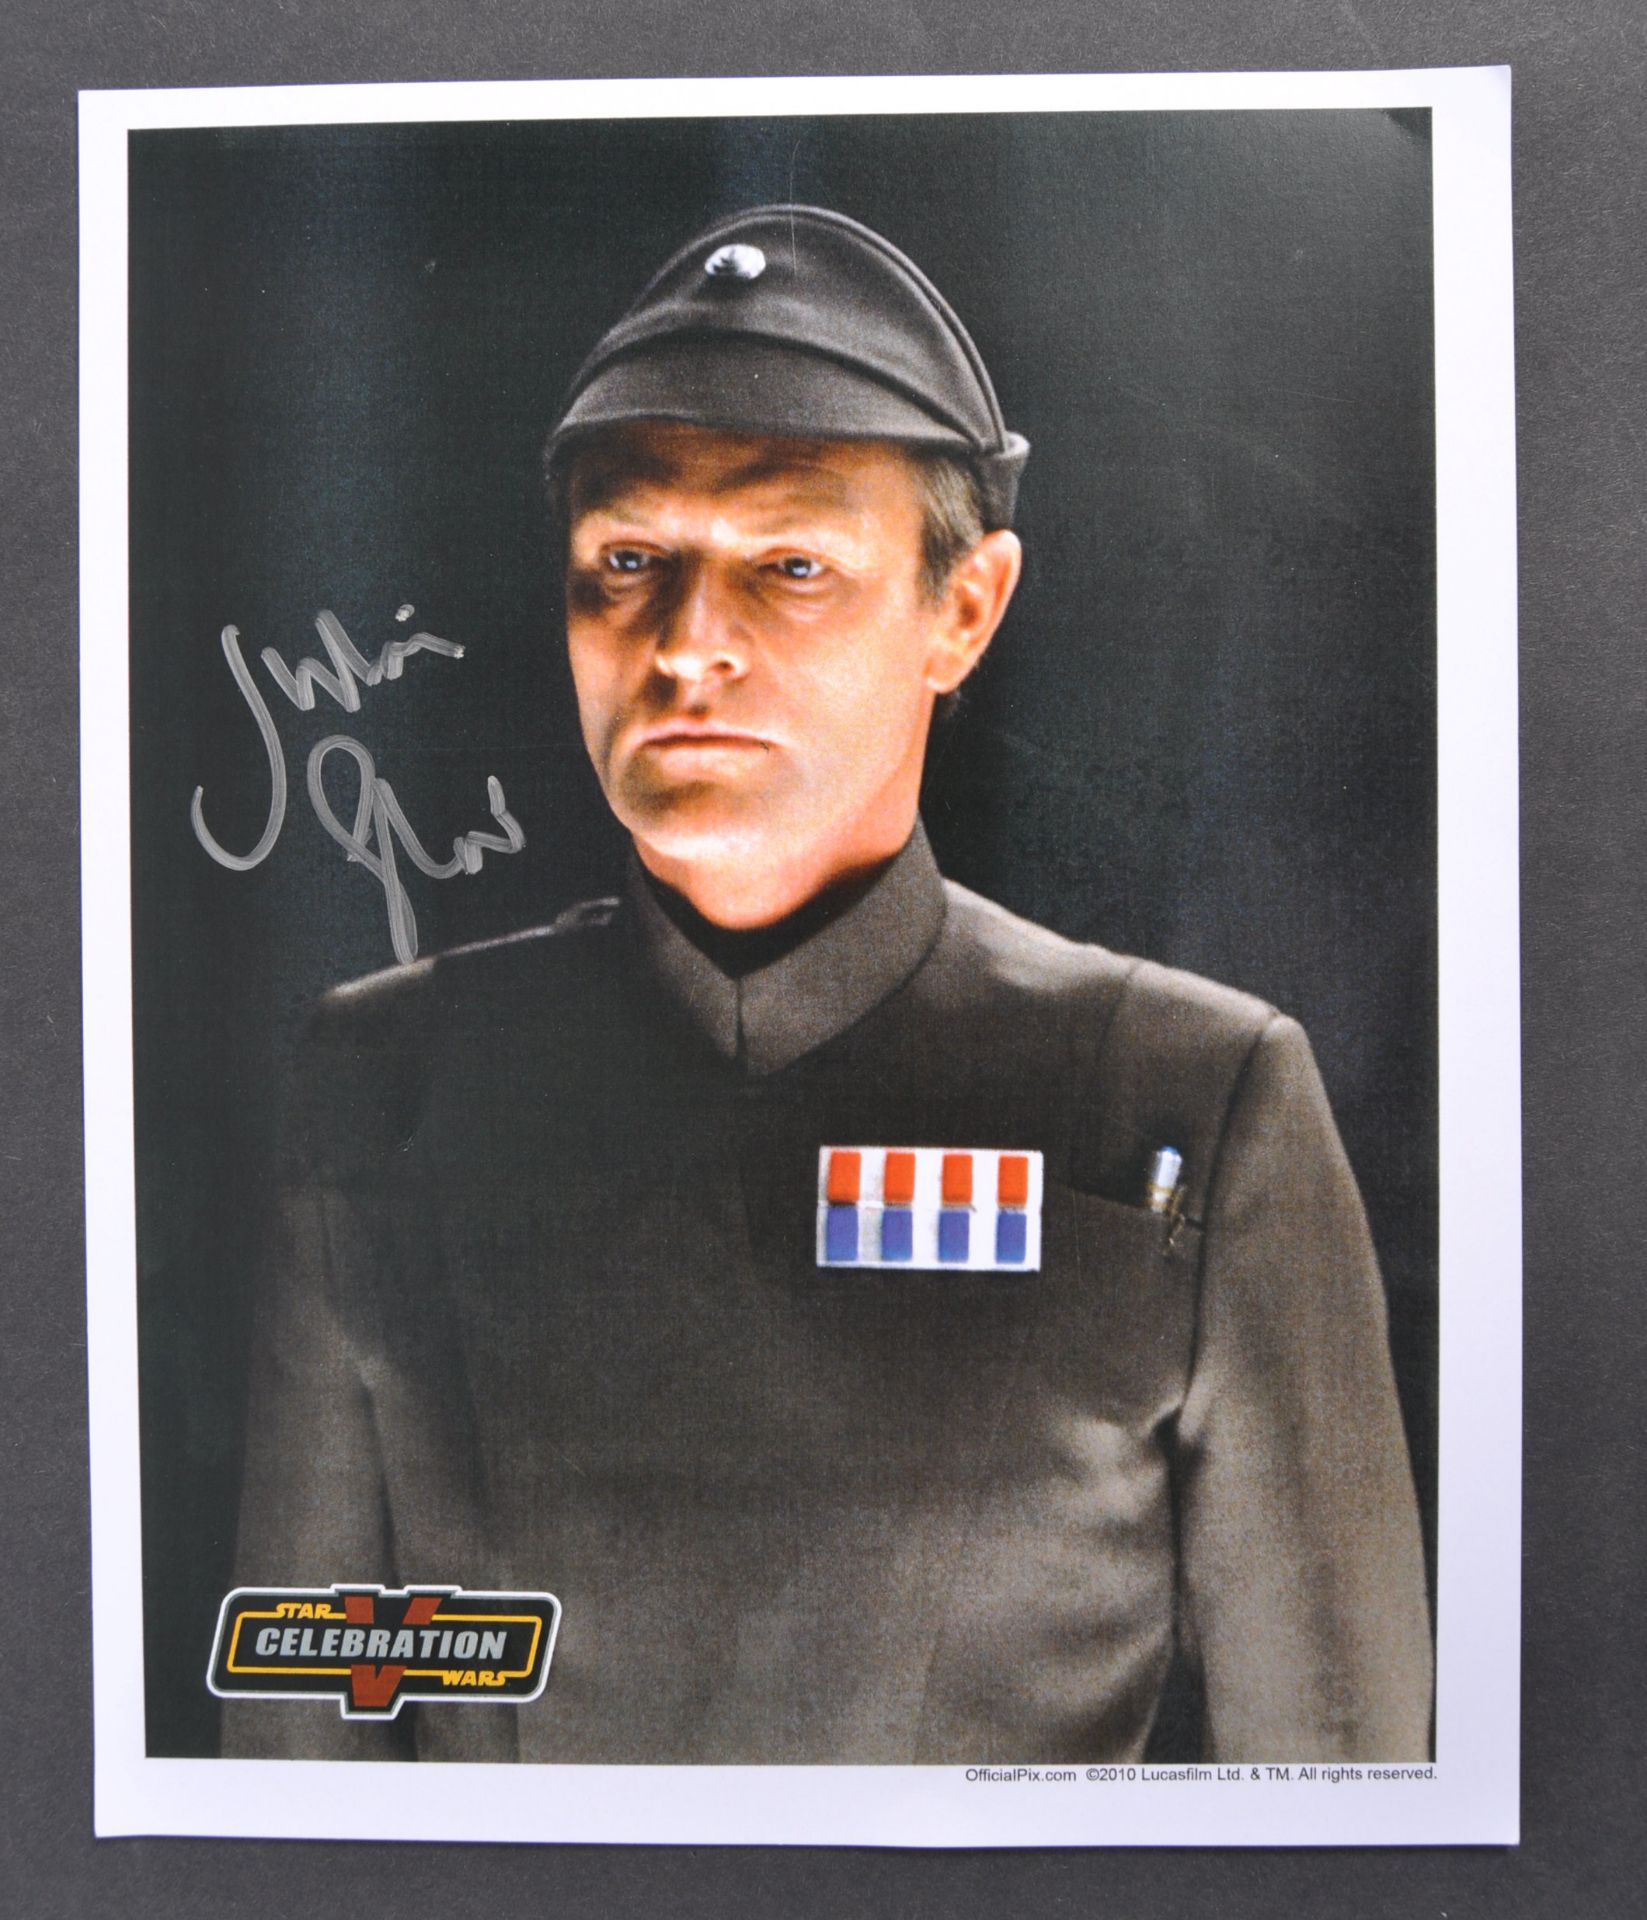 STAR WARS THE EMPIRE STRIKES BACK - JULIAN GLOVER AUTOGRAPHED PHOTOGRAPH